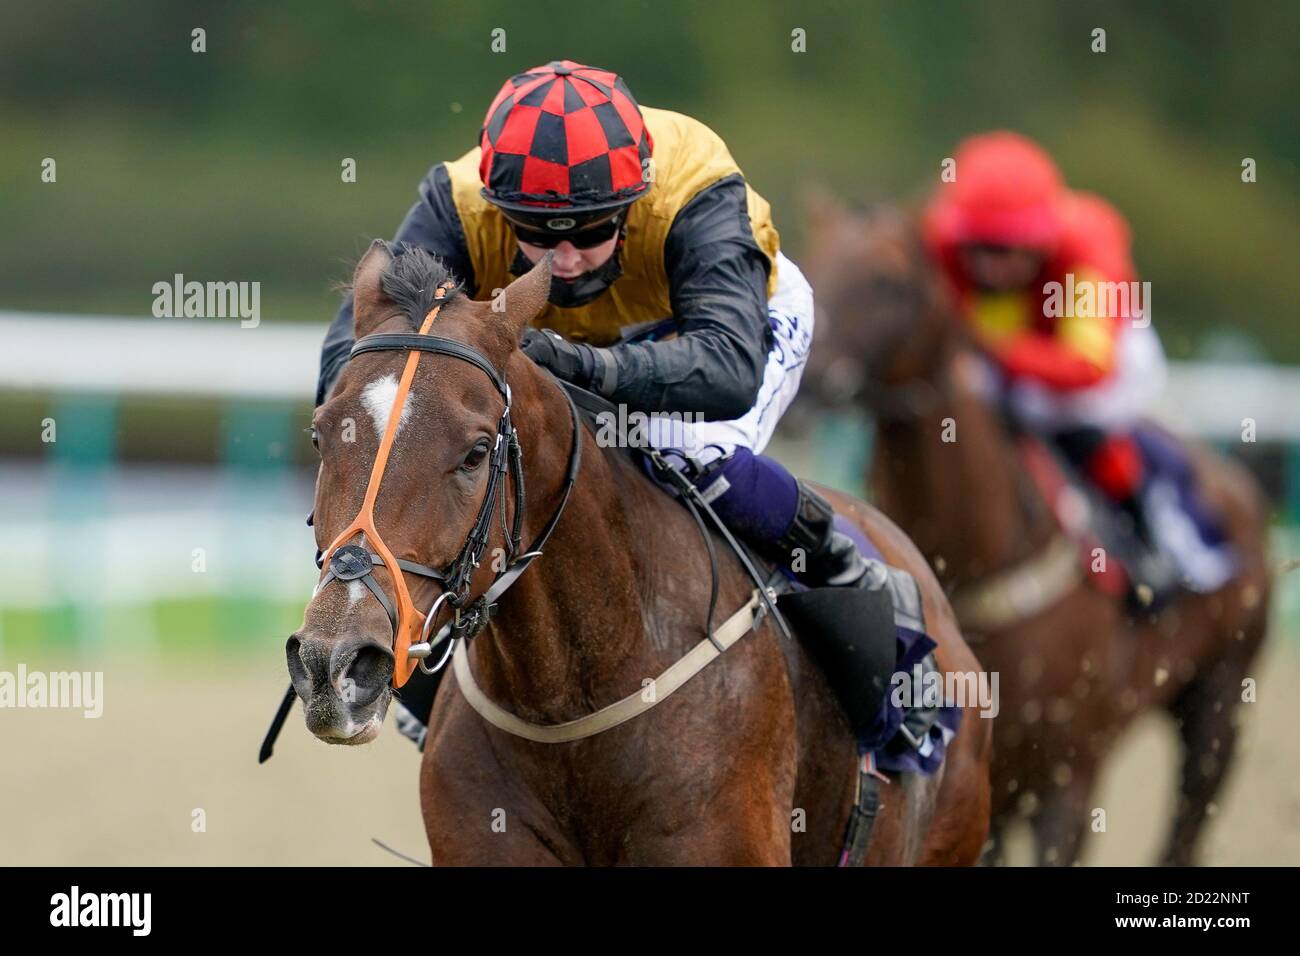 David Probert riding Accomplice win The Read Andrew Balding On Betway Insider Handicap at Lingfield Park at Lingfield Park Racecourse. Stock Photo